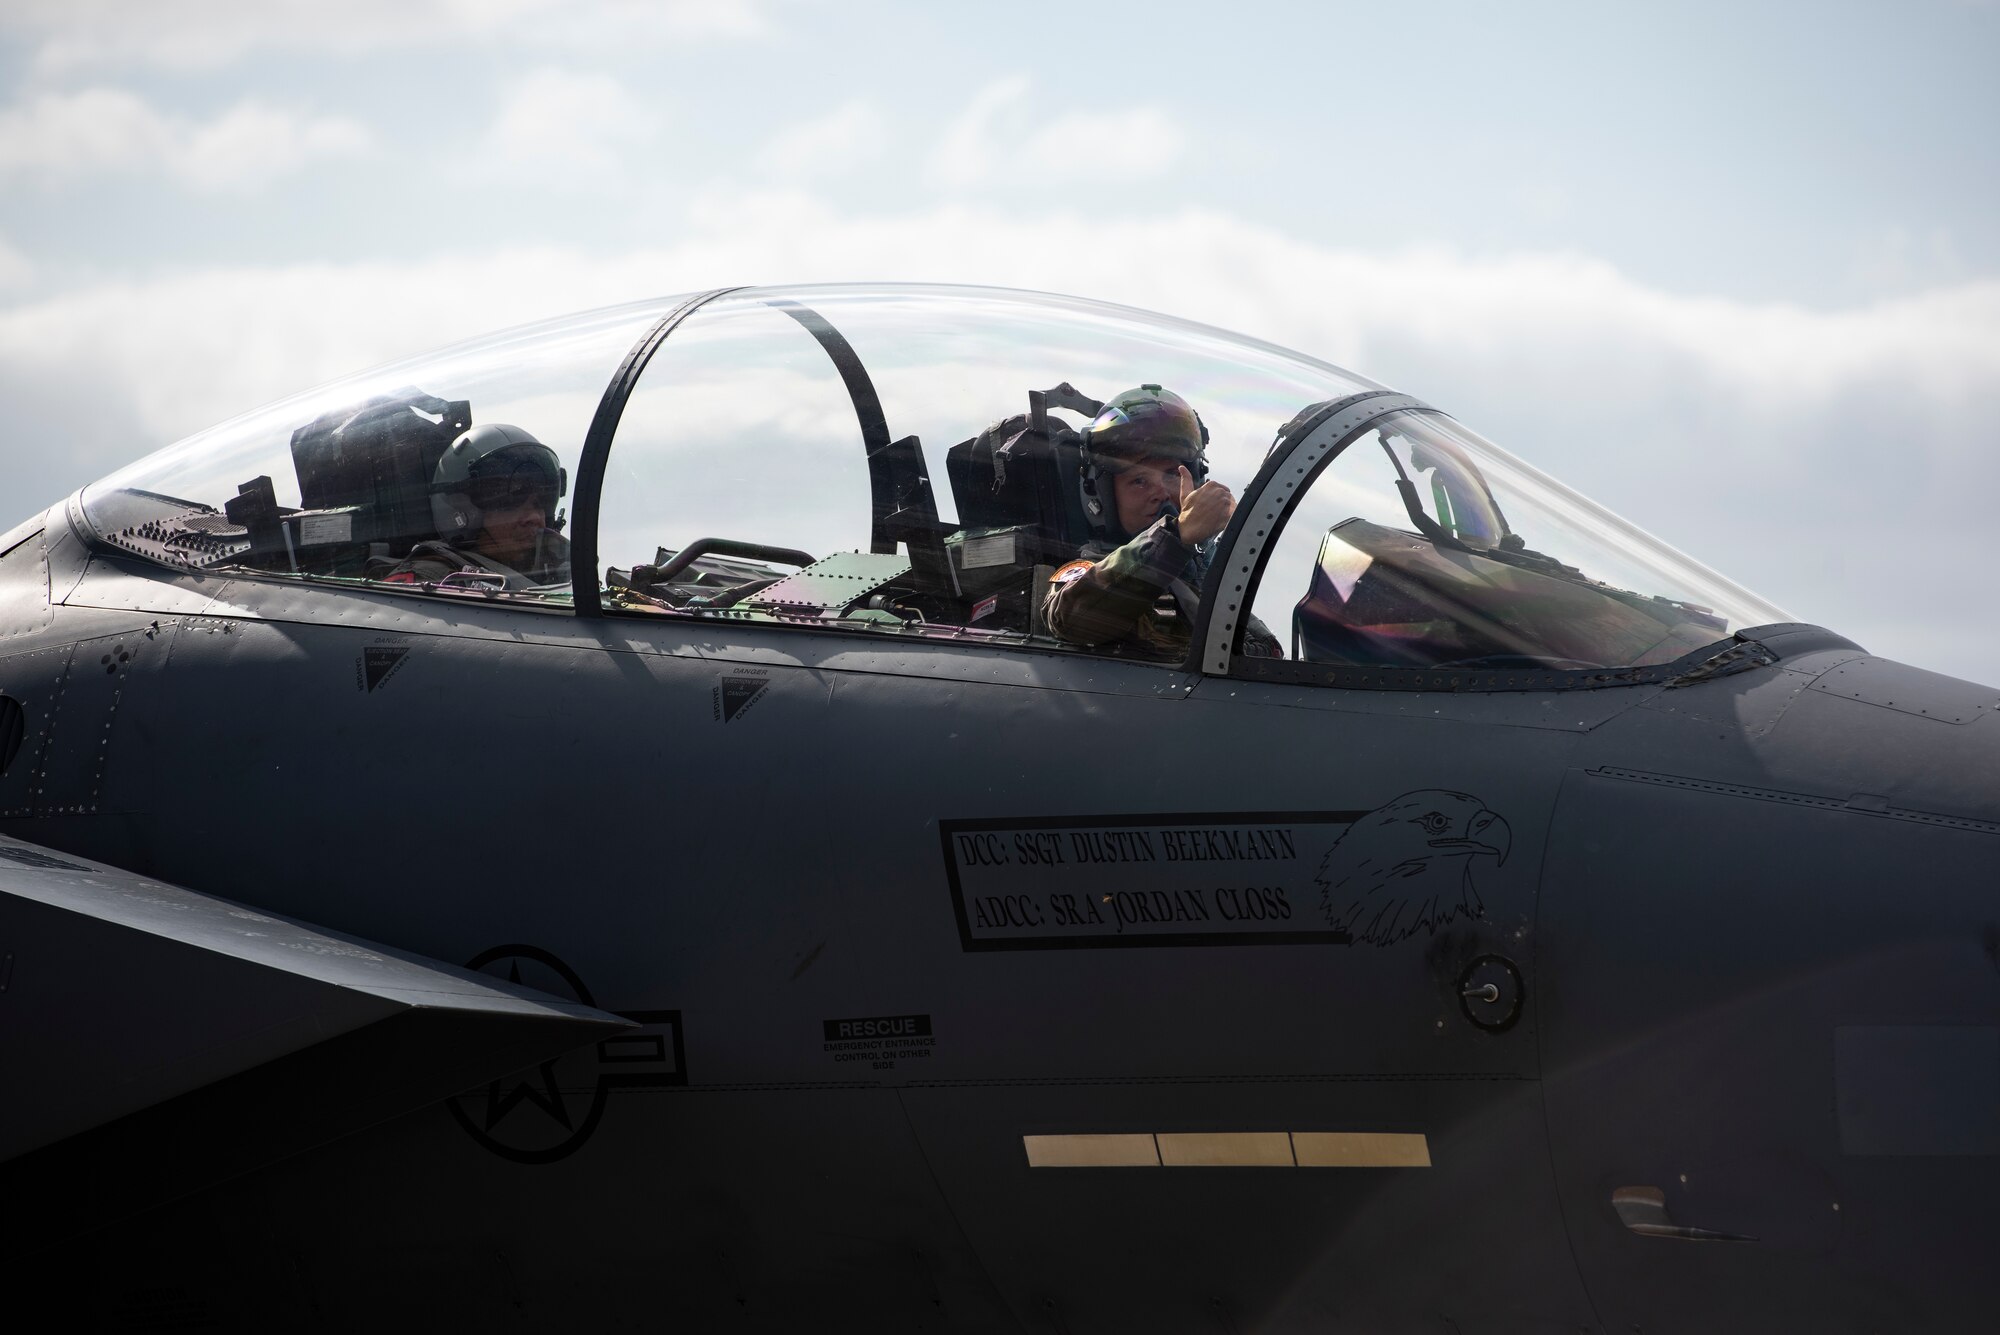 A U.S. Air Force pilot assigned to the 494th Fighter Squadron gives a thumbs up as he taxi’s an F-15E Strike Eagle down the flightline prior to takeoff in support of exercise Point Blank 20-4 at Royal Air Force Lakenheath, England, Sept. 10, 2020.  Exercises like Point Blank increase interoperability and collective readiness with other NATO forces, deter potential adversaries and ensure the skies above the European theater remain sovereign. (U.S. Air Force photo by Airman 1st Class Jessi Monte)